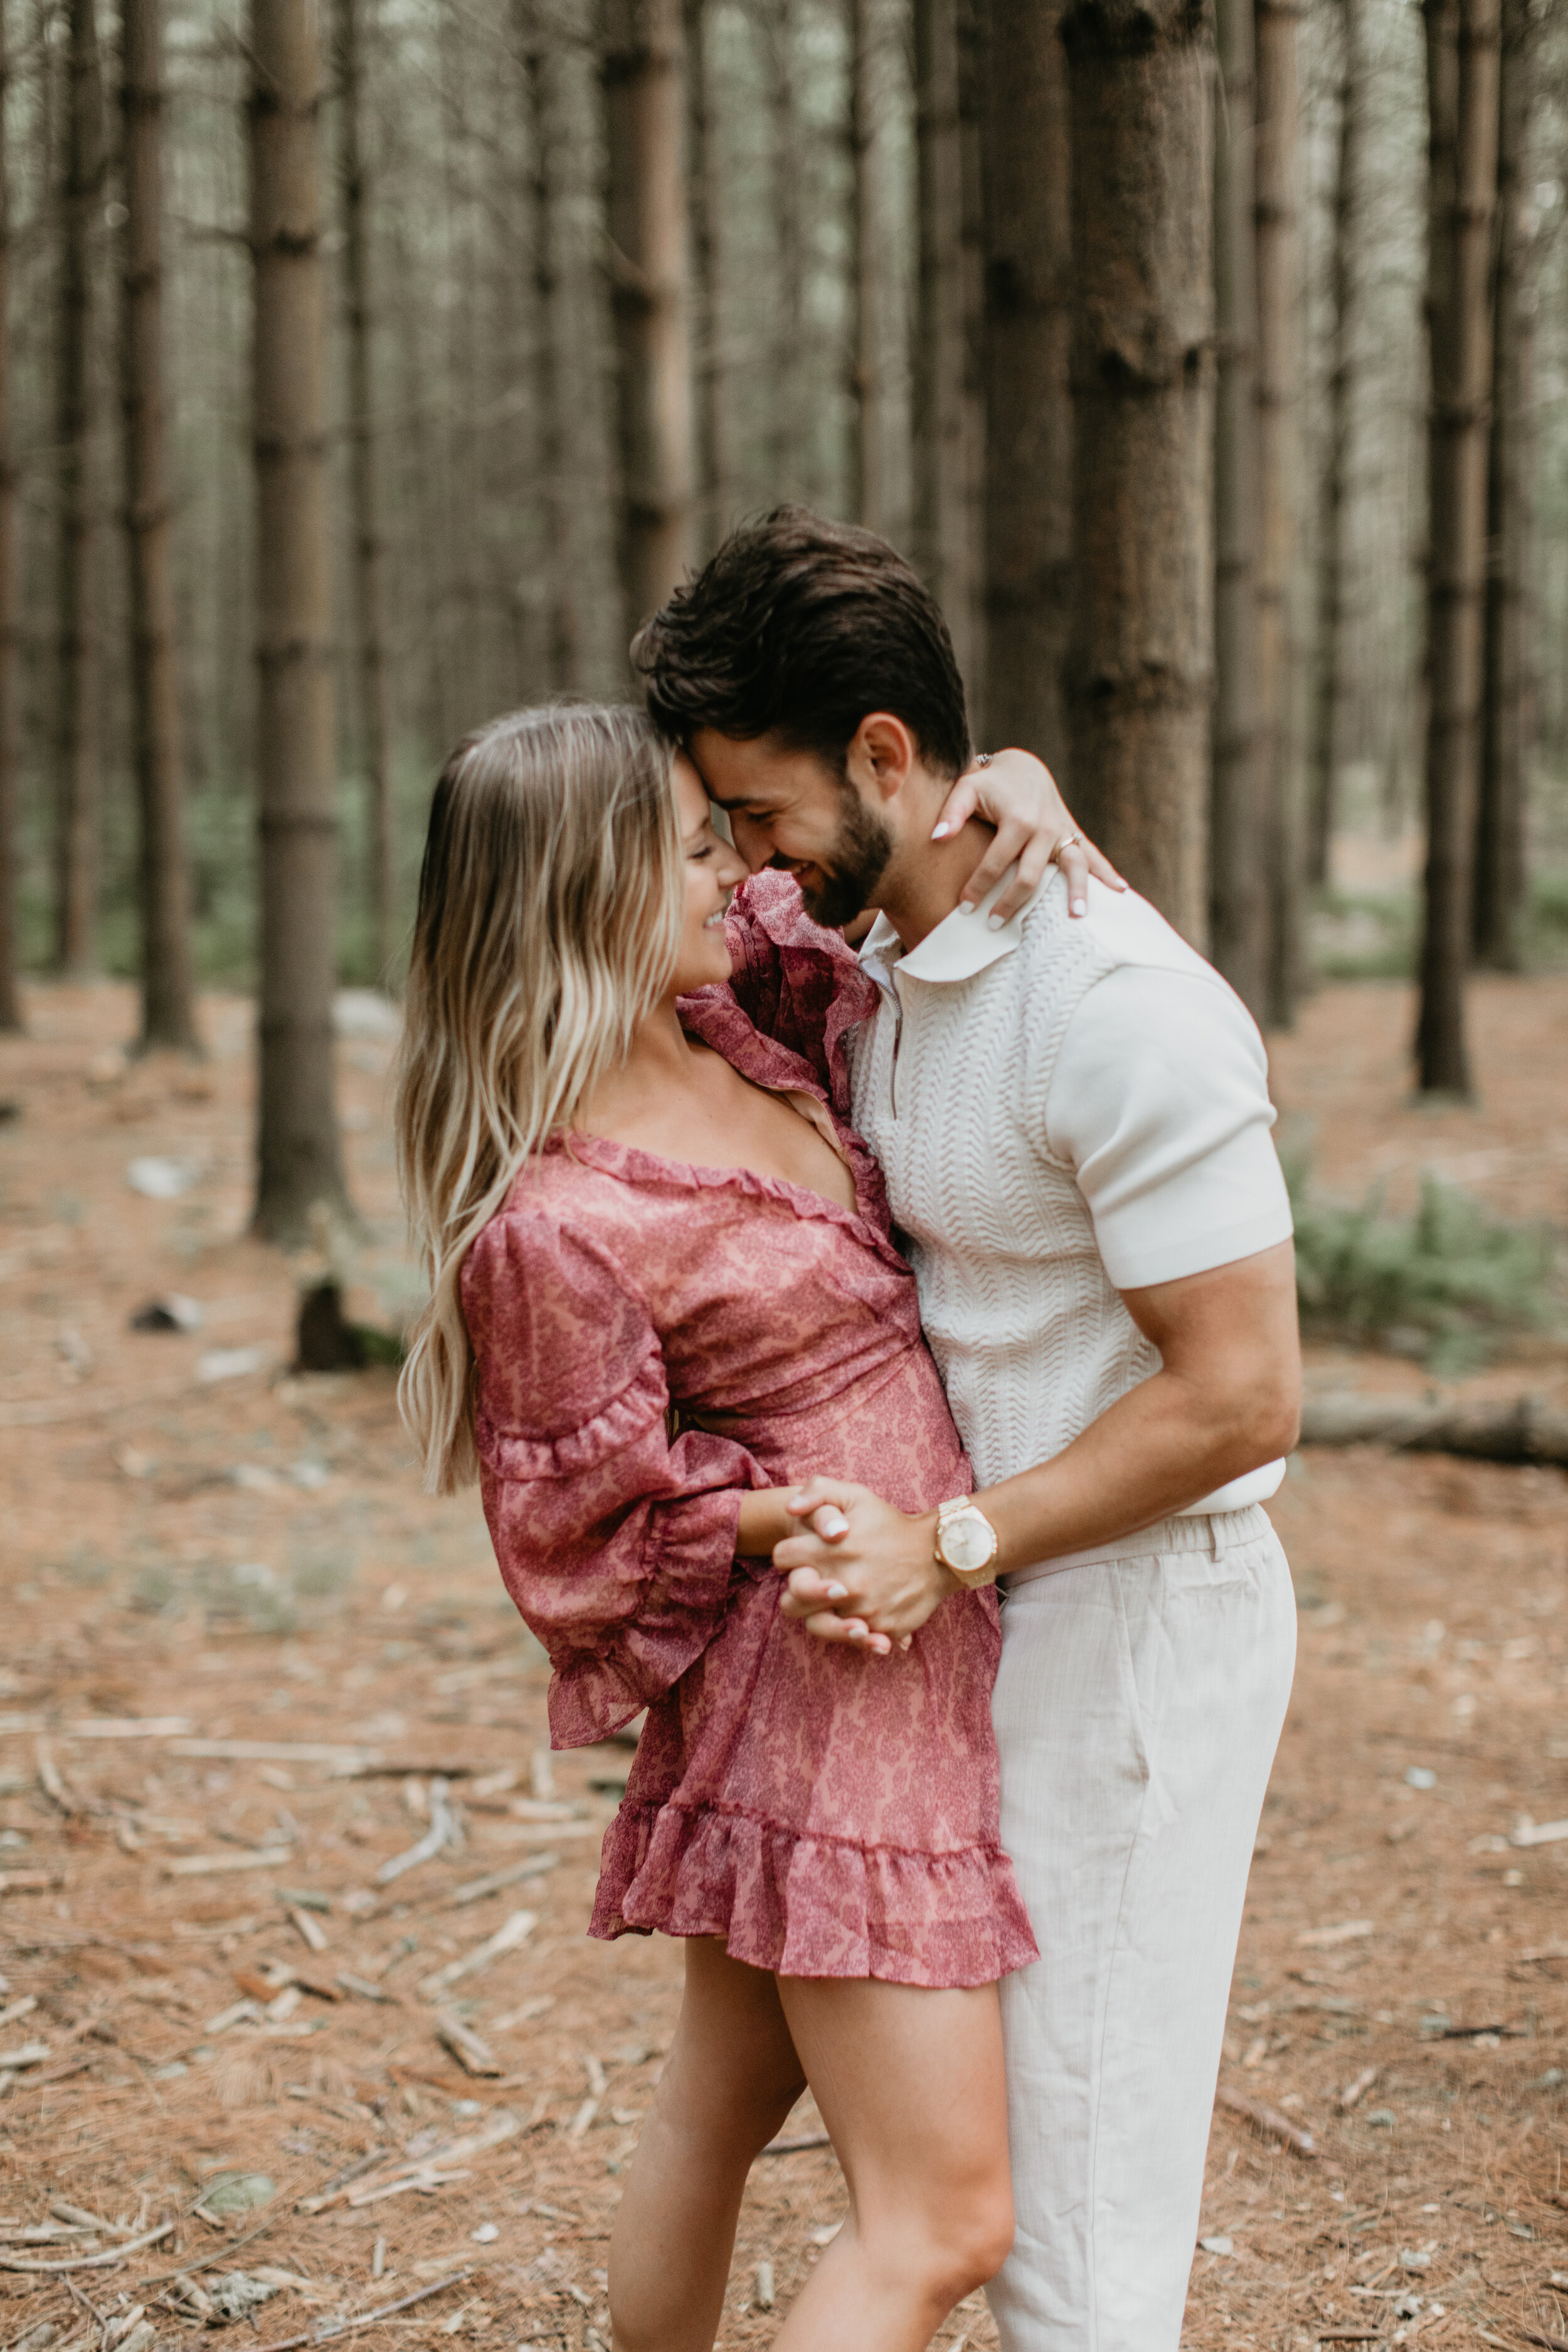 Nicole-Daacke-Photography-michaux-state-forest-elopement-adventure-engagement-session-pennsylvania-elopement-pa-elopement-photographer-gettysburg-photographer-state-park-elopement-engagement-session-pennsylvania-waterfall-106.jpg